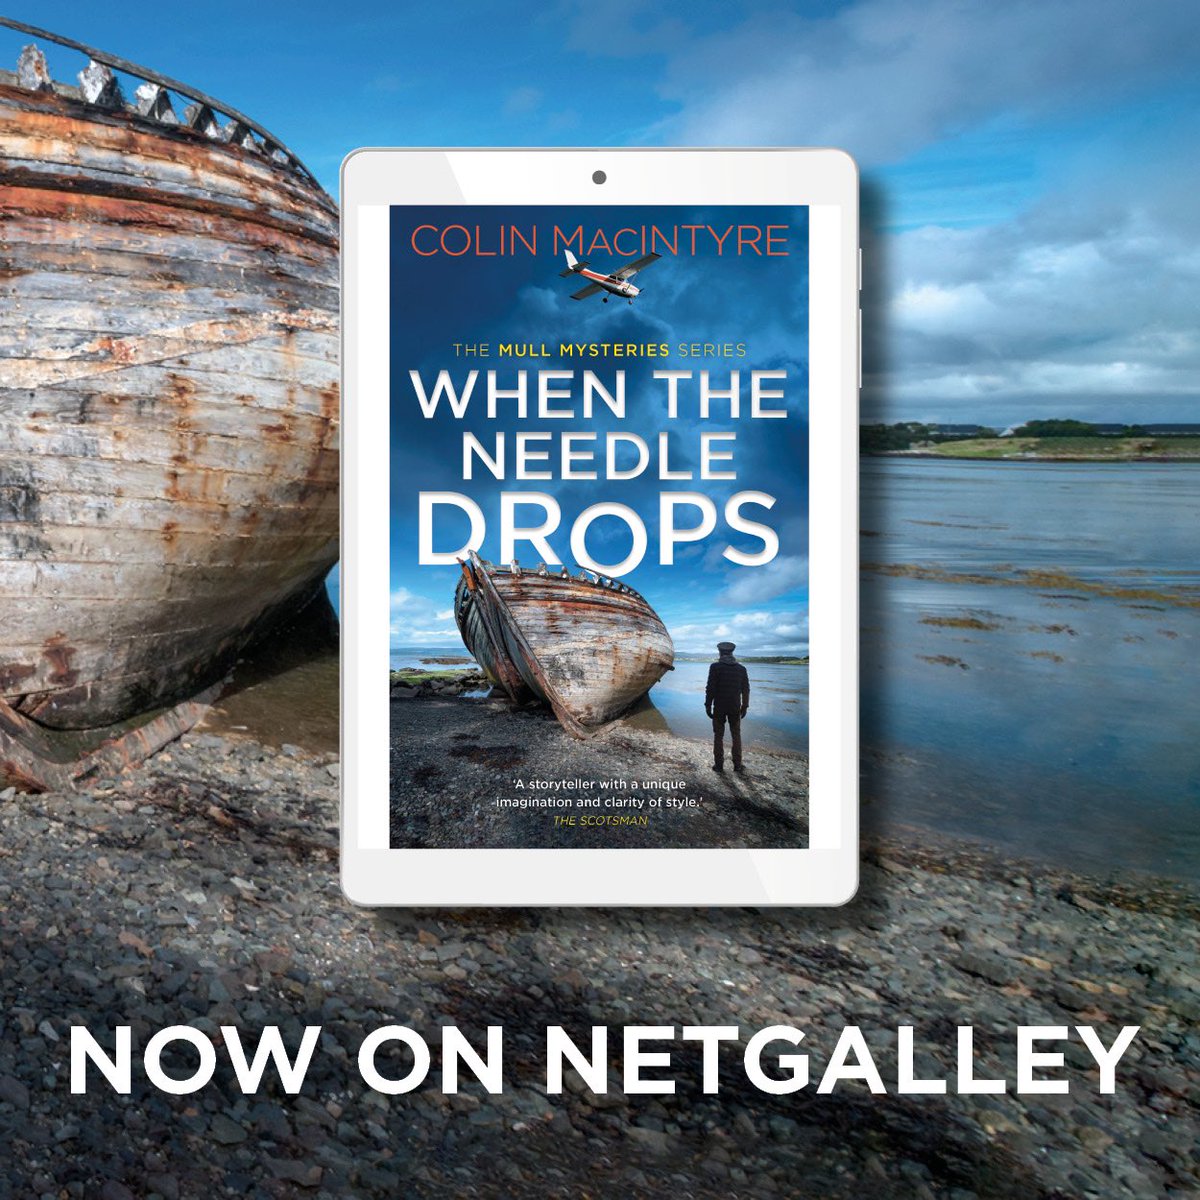 Very happy to say ‘When The Needle Drops’ is available to pre-order, released 9th May! linktr.ee/colinmacintyre > Now up on @NetGalley @colinmacIntyre @bwpublishing @bonnierbooks_uk @stonehillsalt @Xtra_Mile